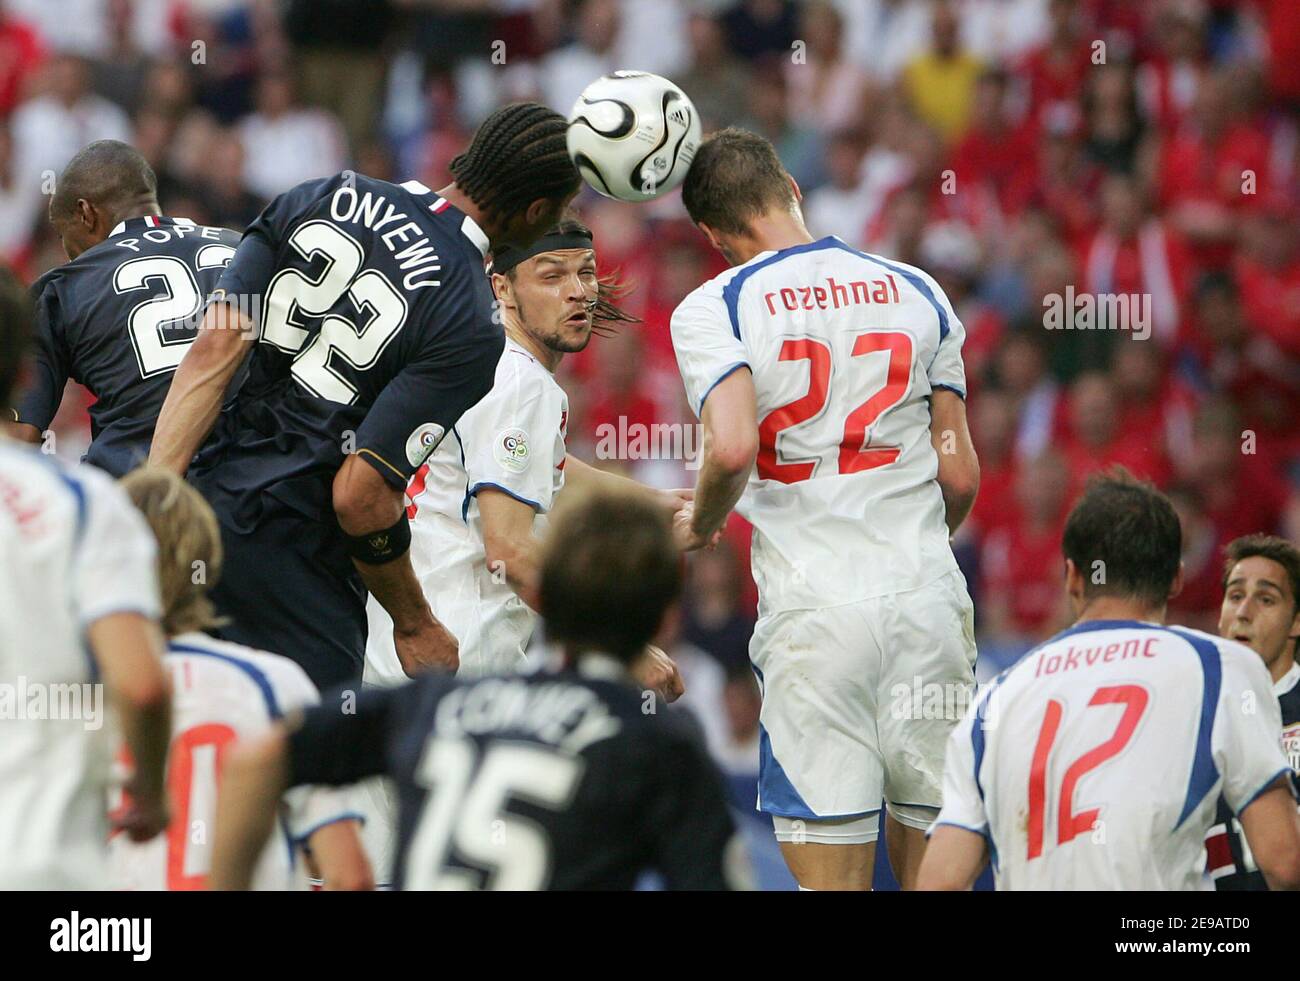 USA's Oguchi Onyewu and Czech Republic's David Rozehnal in action during the World Cup 2006, Group E, Czech Republic vs USA in Gelsenkirchen, Germany on June 12, 2006. Czech Republic won 3-0. Photo by Gouhier-Hahn-Orban/Cameleon/ABACAPRESS.COM Stock Photo